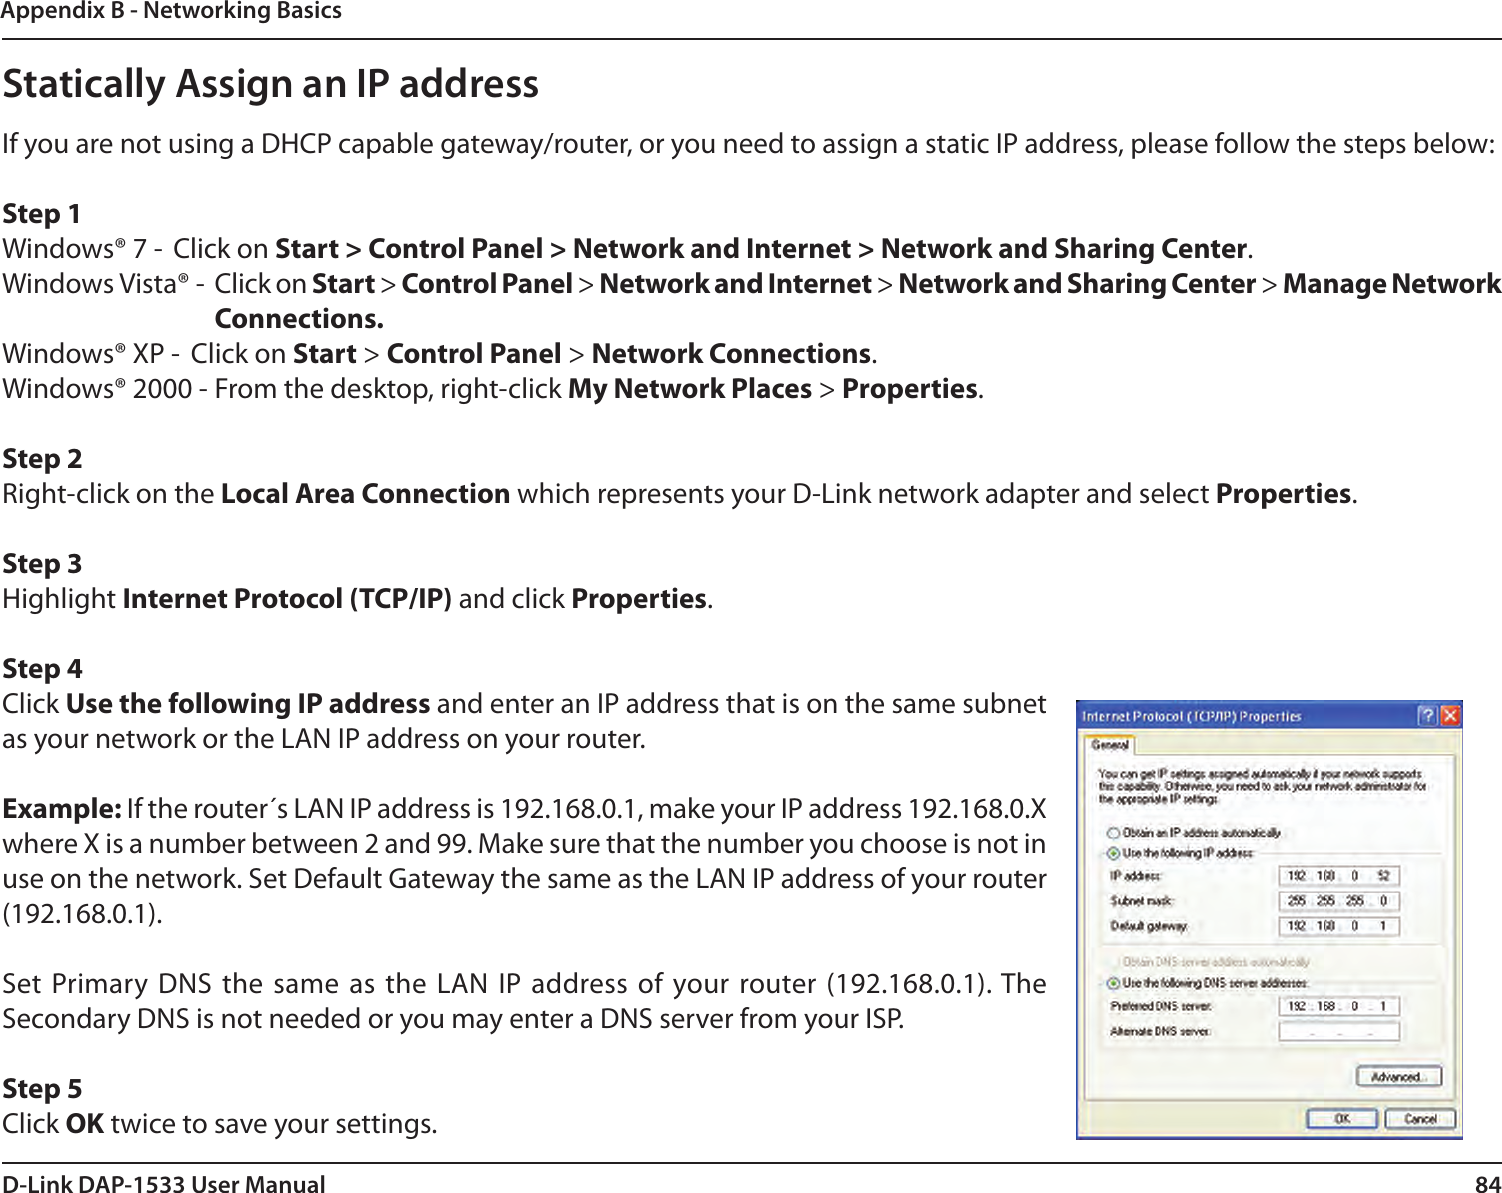 84D-Link DAP-1533 User ManualAppendix B - Networking BasicsStatically Assign an IP addressIf you are not using a DHCP capable gateway/router, or you need to assign a static IP address, please follow the steps below:Step 1Windows® 7 -  Click on Start &gt; Control Panel &gt; Network and Internet &gt; Network and Sharing Center.Windows Vista® -  Click on Start &gt; Control Panel &gt; Network and Internet &gt; Network and Sharing Center &gt; Manage Network Connections.Windows® XP -  Click on Start &gt; Control Panel &gt; Network Connections.Windows® 2000 - From the desktop, right-click My Network Places &gt; Properties.Step 2Right-click on the Local Area Connection which represents your D-Link network adapter and select Properties.Step 3Highlight Internet Protocol (TCP/IP) and click Properties.Step 4Click Use the following IP address and enter an IP address that is on the same subnet as your network or the LAN IP address on your router. Example: If the router´s LAN IP address is 192.168.0.1, make your IP address 192.168.0.X where X is a number between 2 and 99. Make sure that the number you choose is not in use on the network. Set Default Gateway the same as the LAN IP address of your router (192.168.0.1). Set Primary DNS the same as  the  LAN IP address of  your router (192.168.0.1). The Secondary DNS is not needed or you may enter a DNS server from your ISP.Step 5Click OK twice to save your settings.